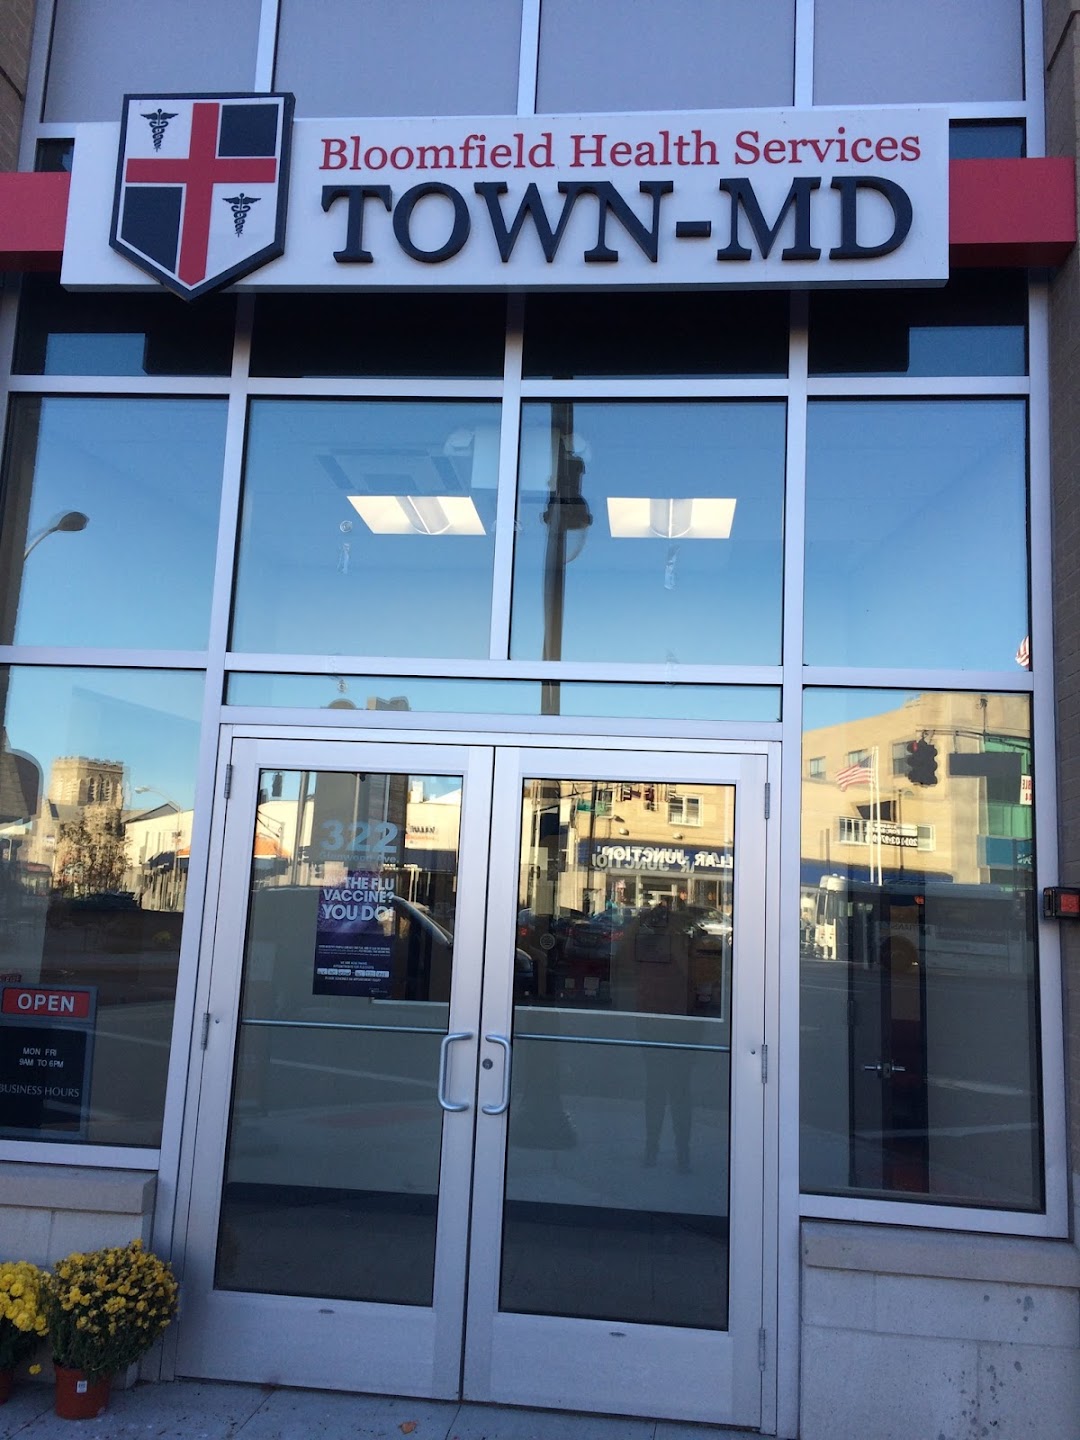 Bloomfield Health Services Town-MD